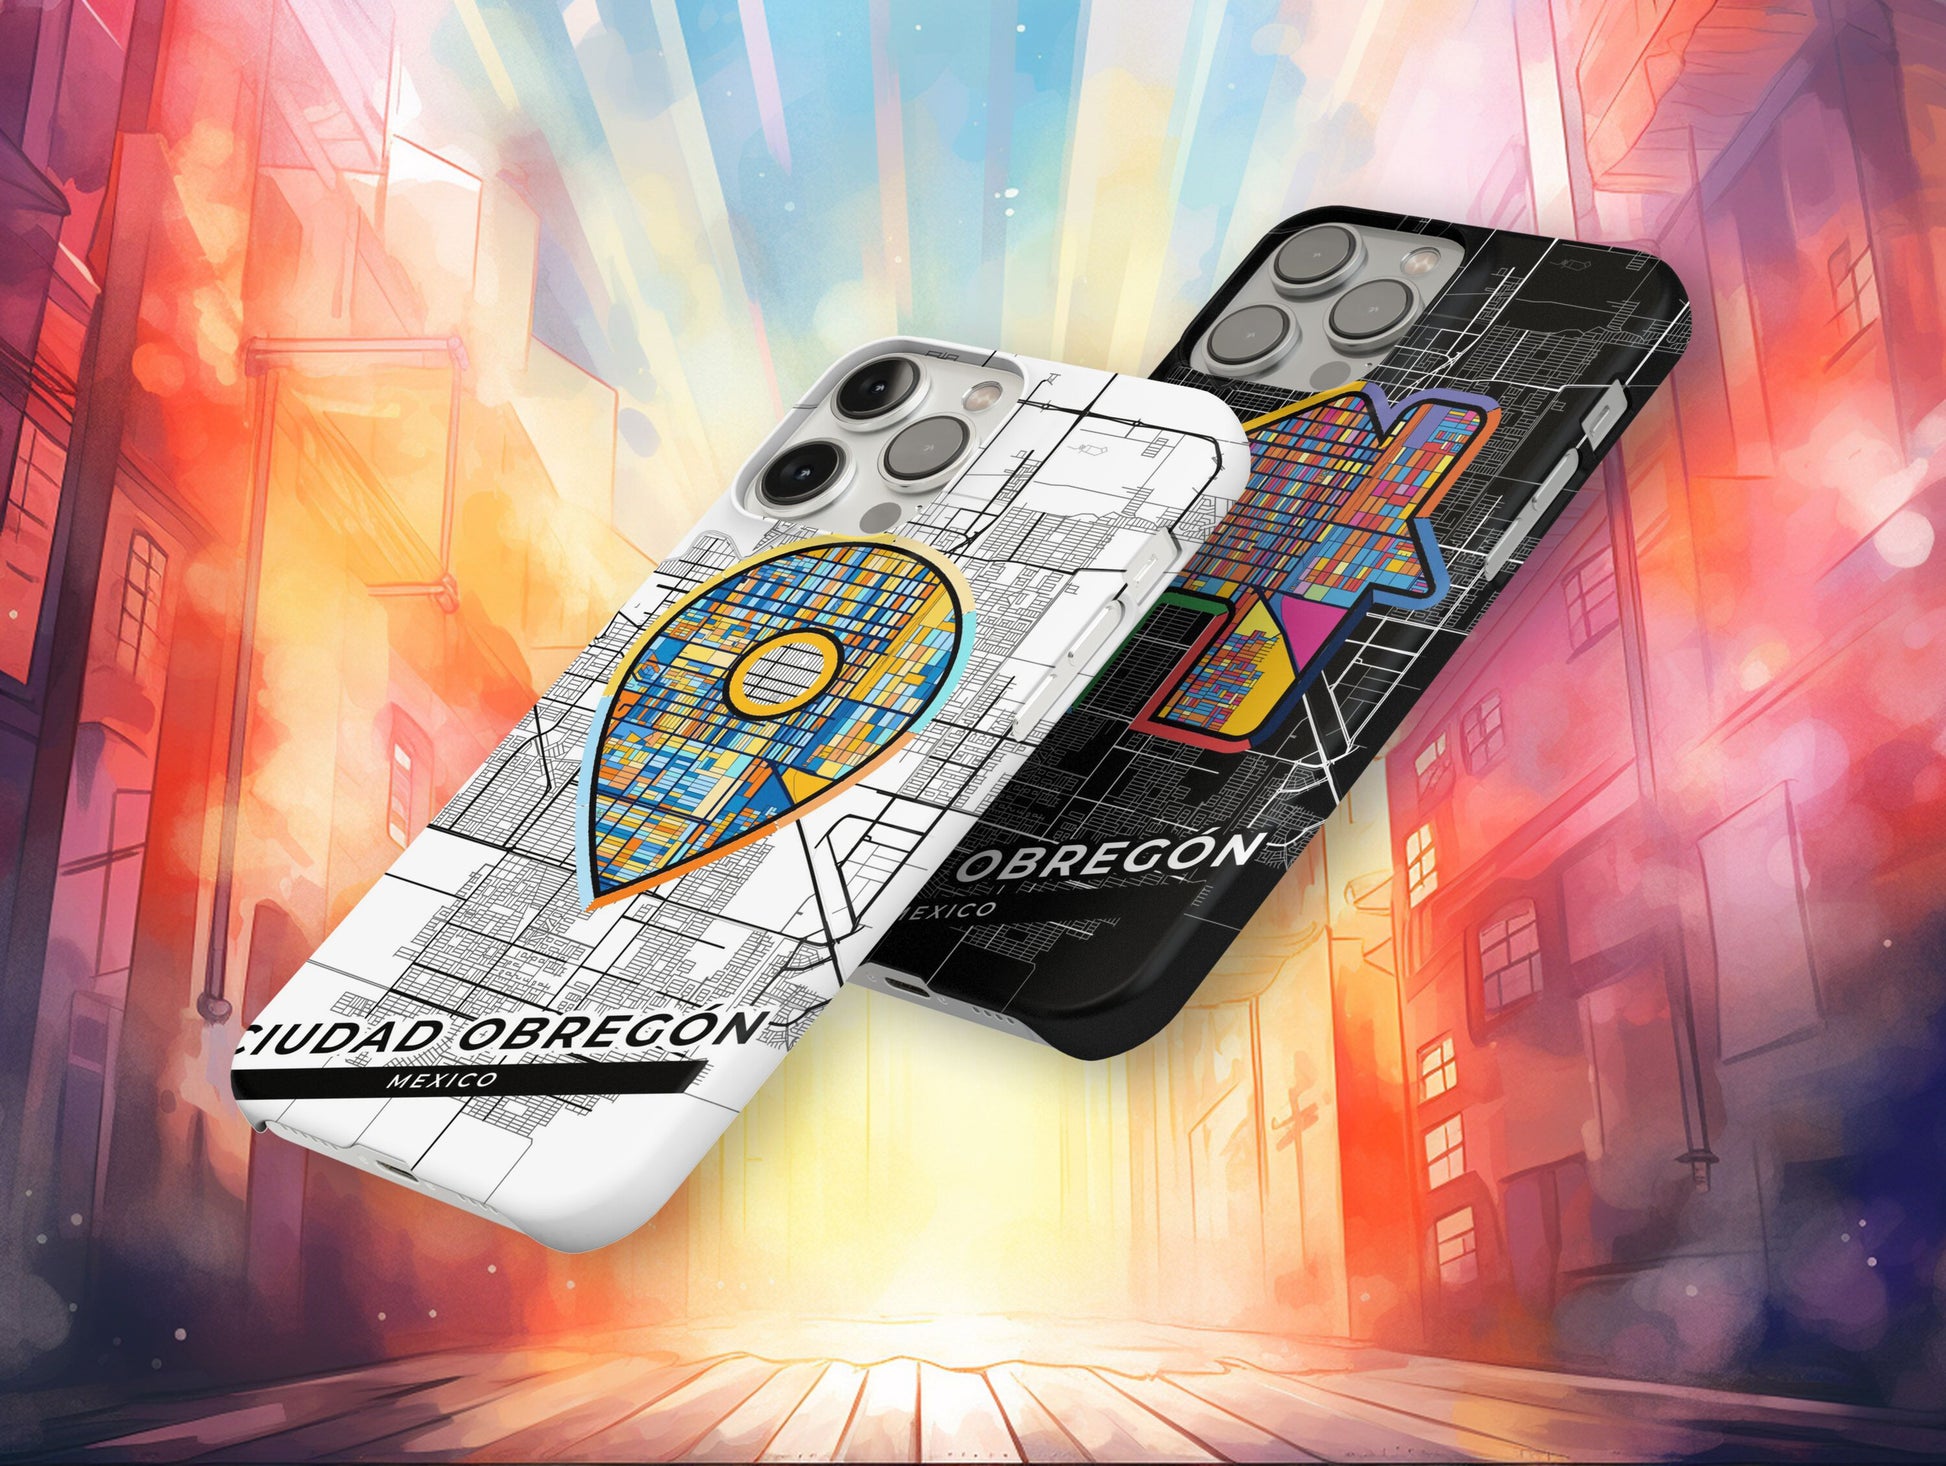 Ciudad Obregón Mexico slim phone case with colorful icon. Birthday, wedding or housewarming gift. Couple match cases.